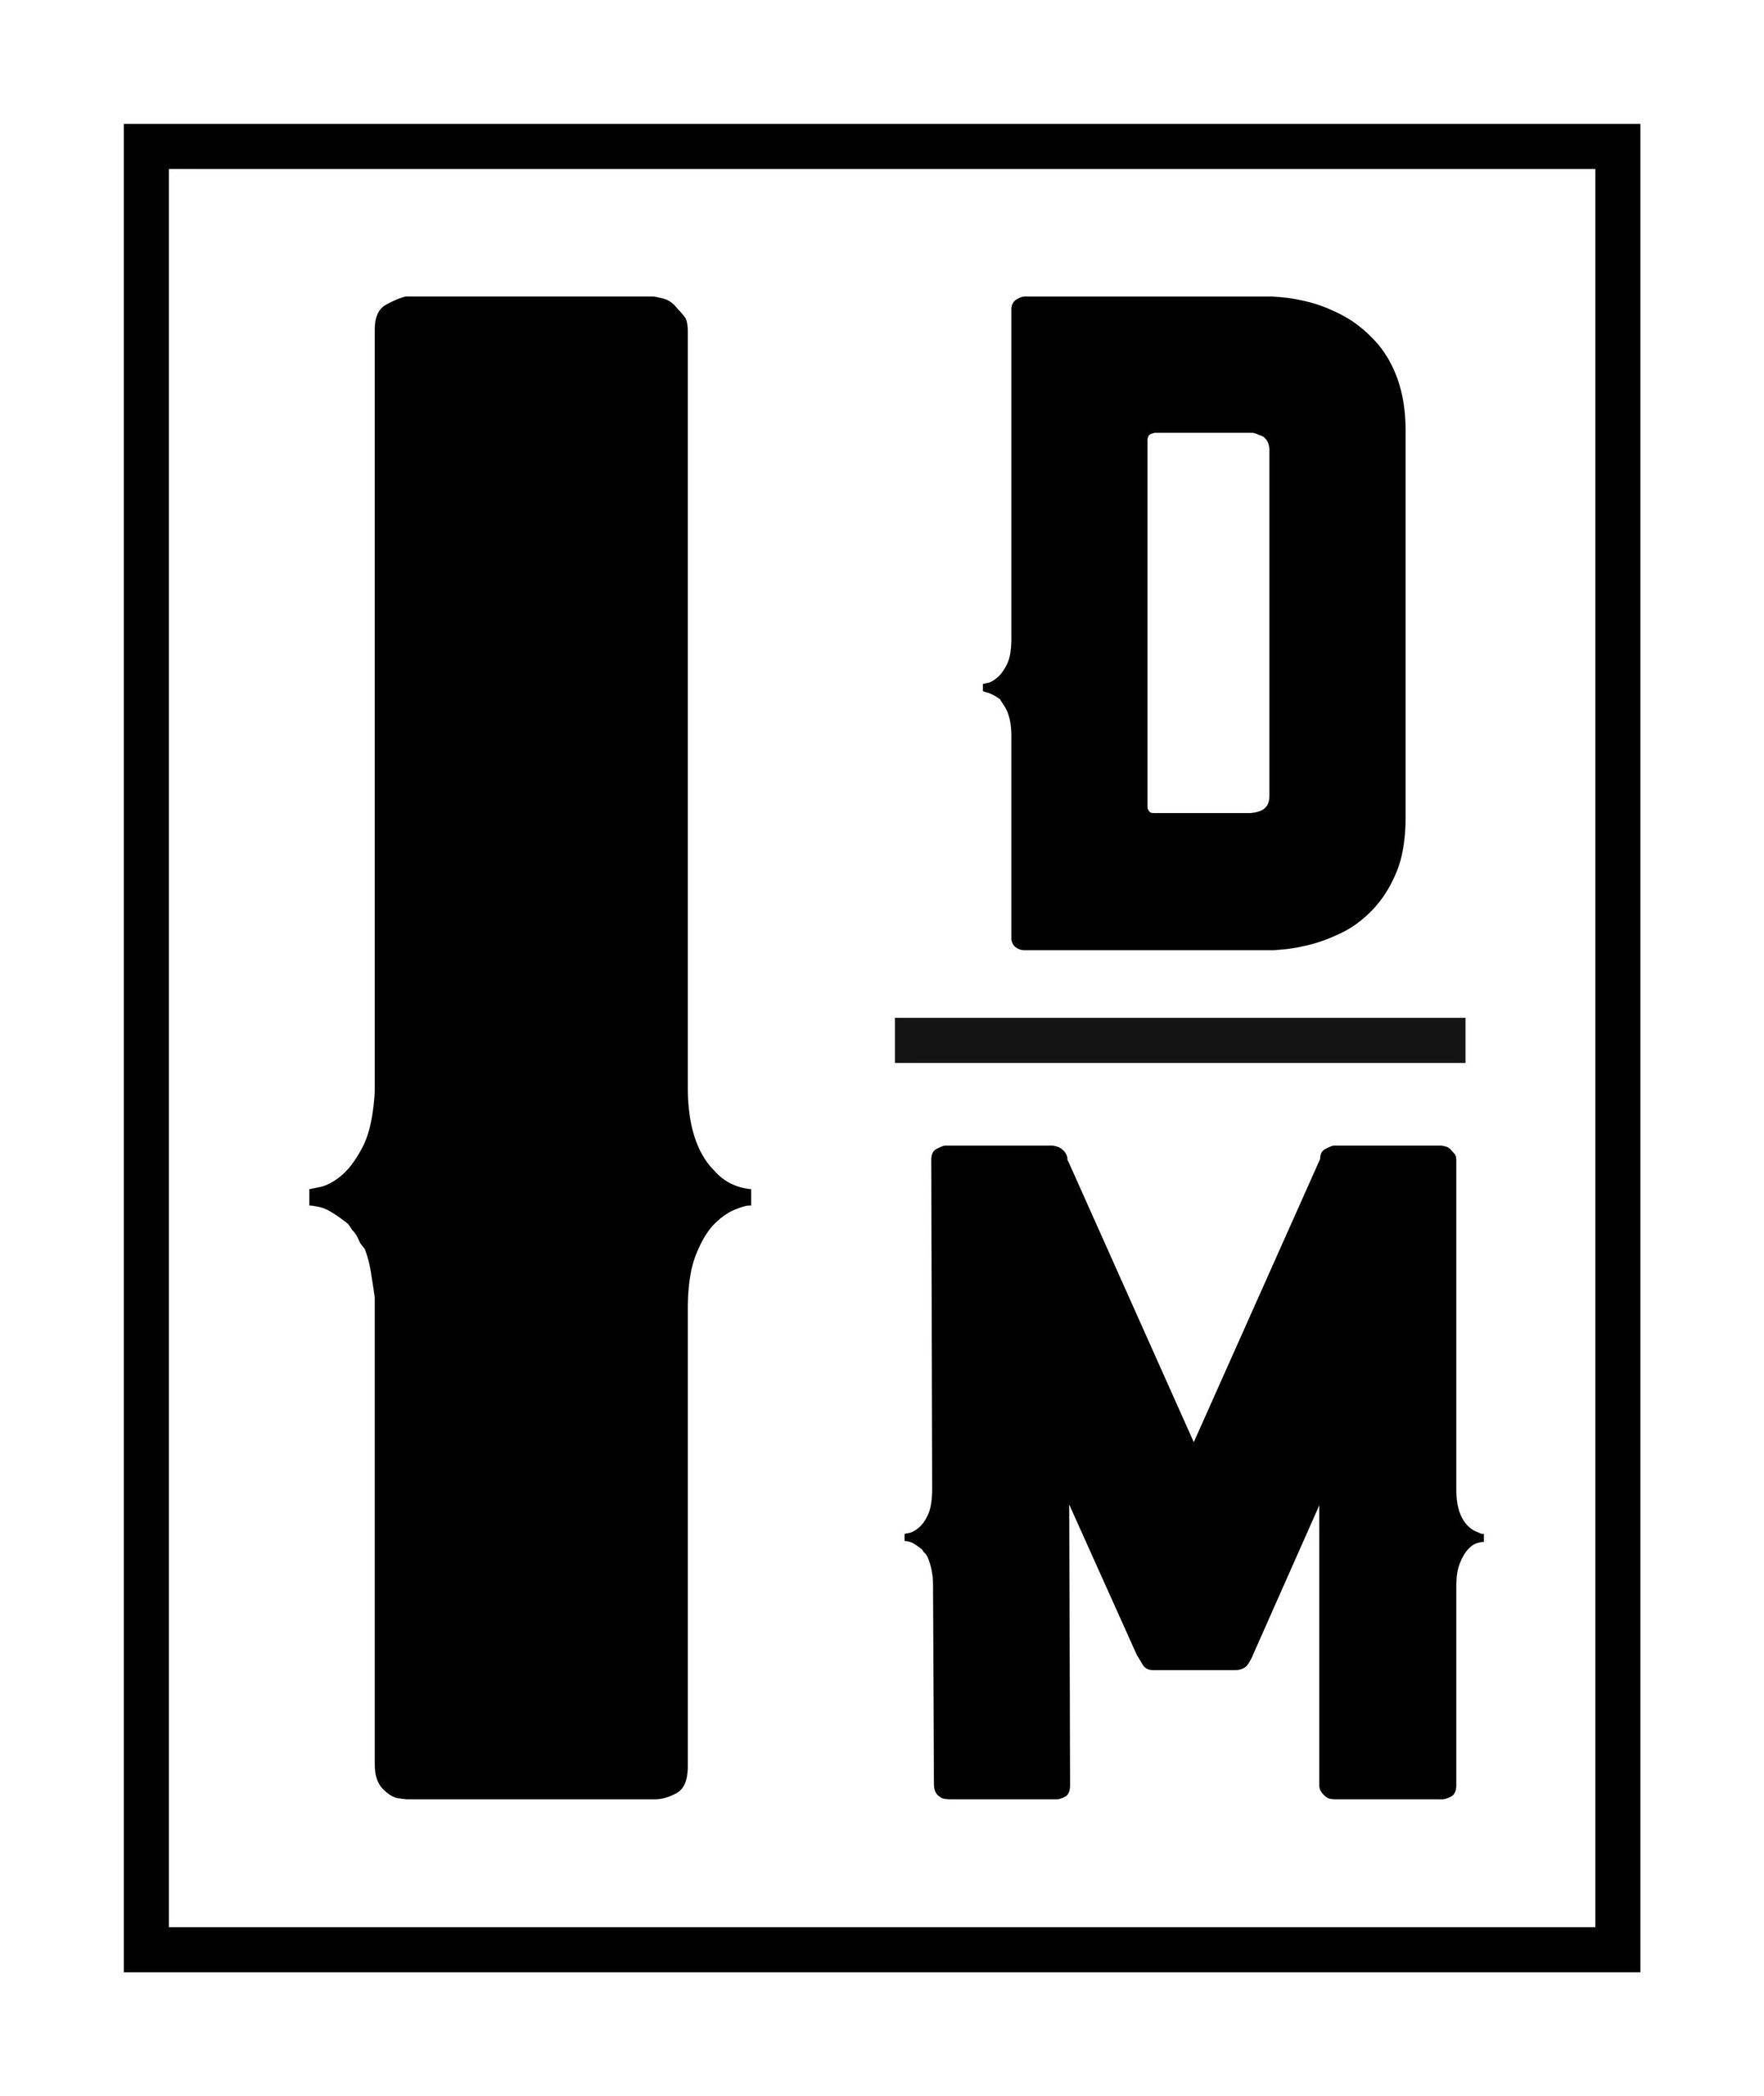 IDM is a small independent record label which is remote base in Jacksonvile, Florida. IDM specialize